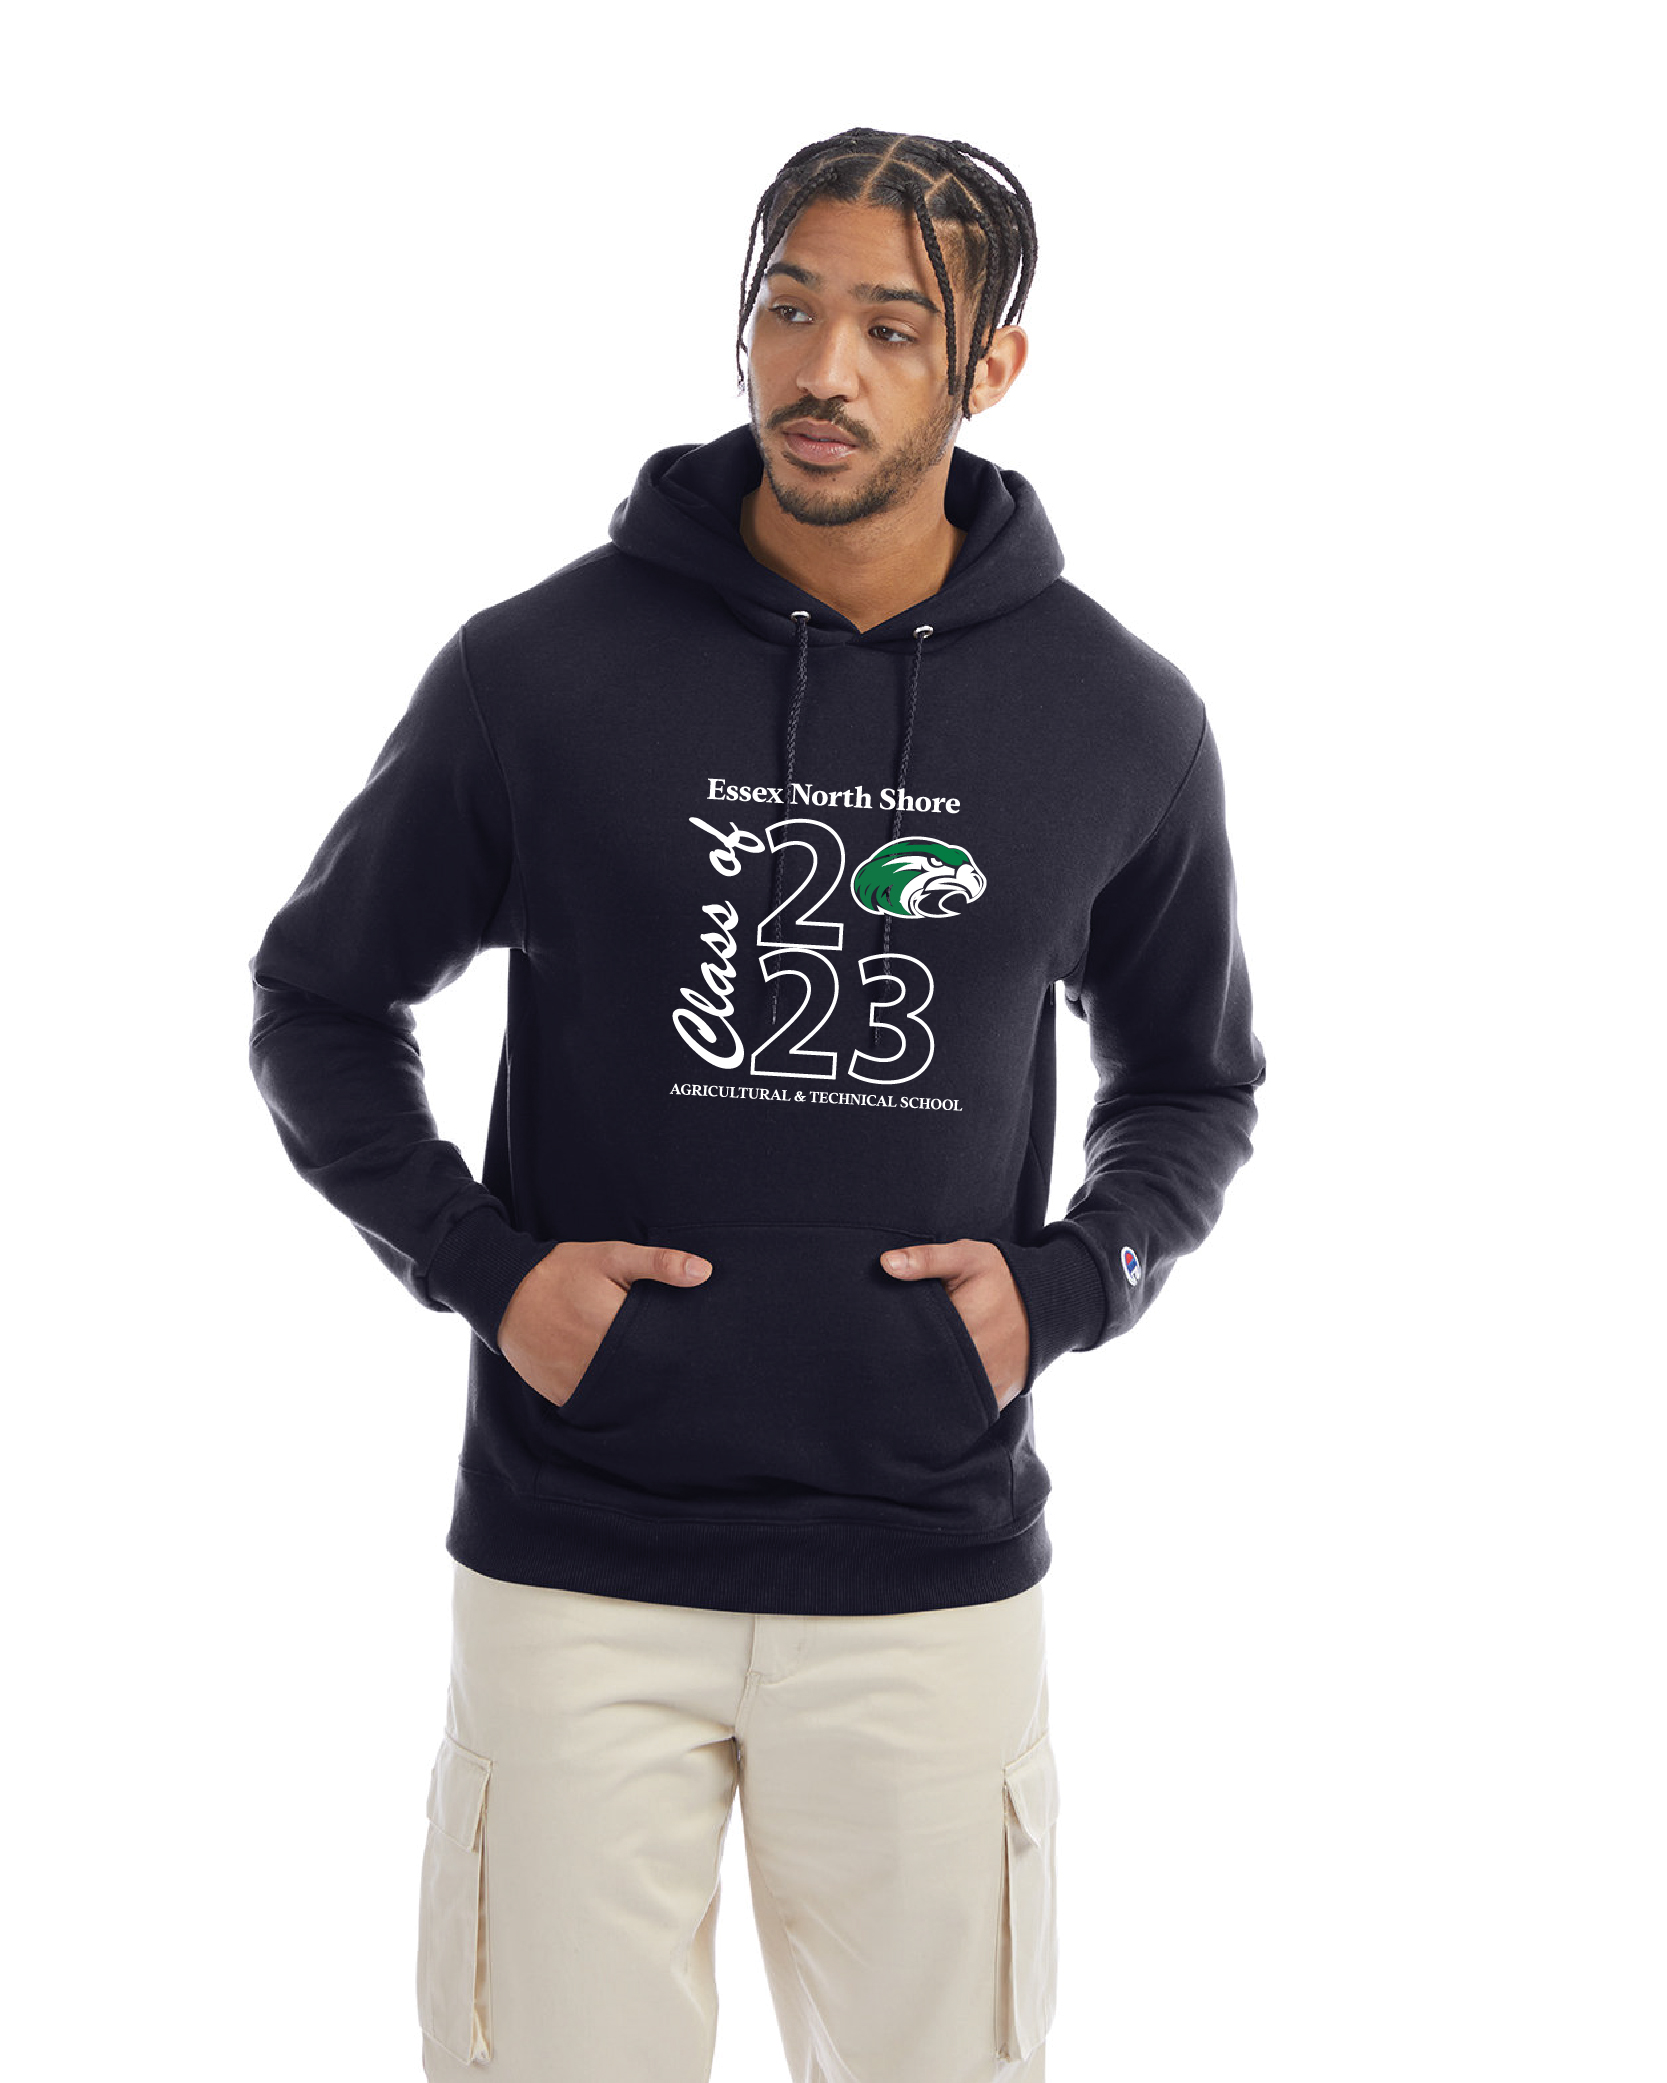 Essex North Shore PTO CLASS OF 2023 Adult Powerblend® Pullover Hooded Sweatshirt.